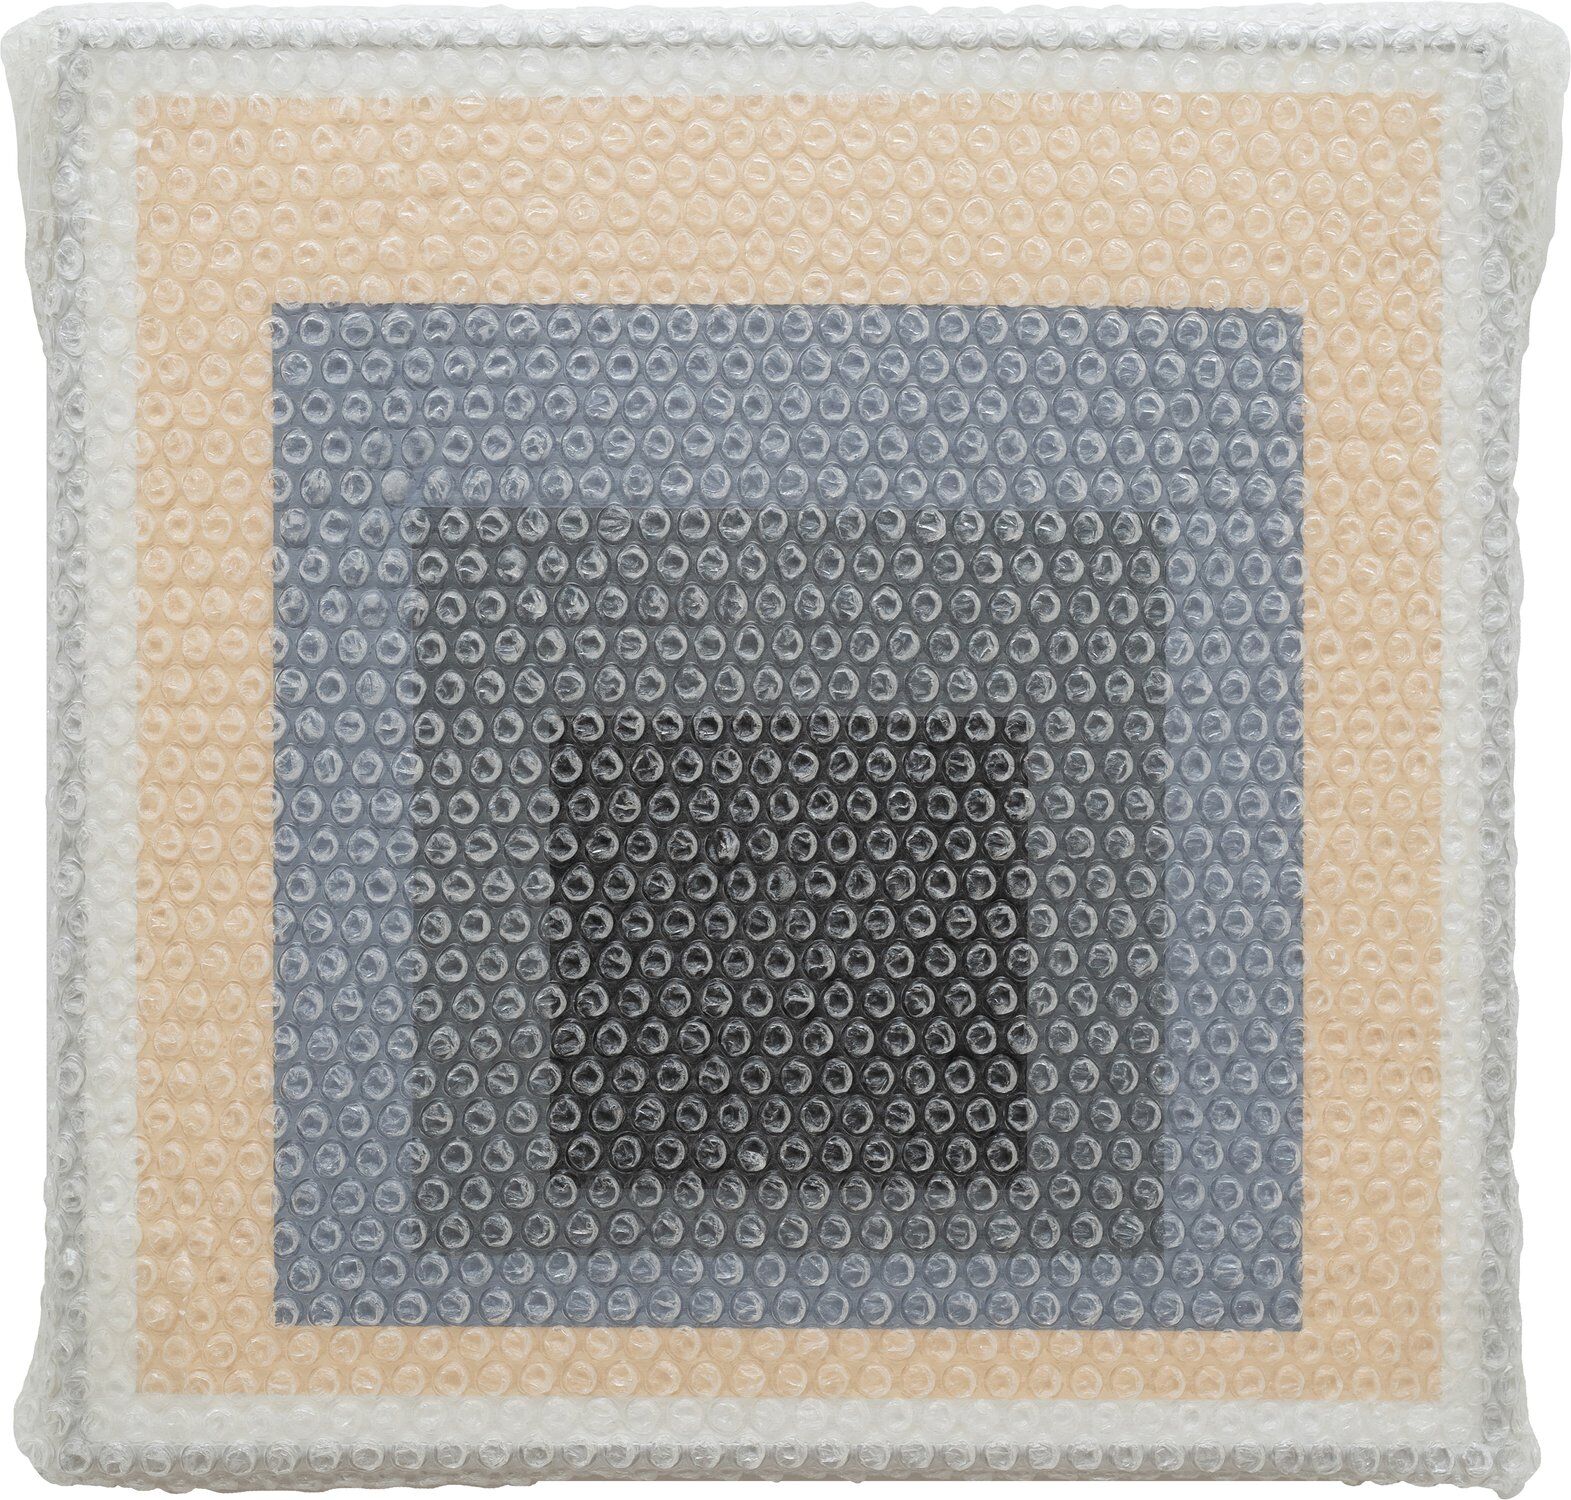 tammi campbell homage to the square with bubble wrap and packing tape 10